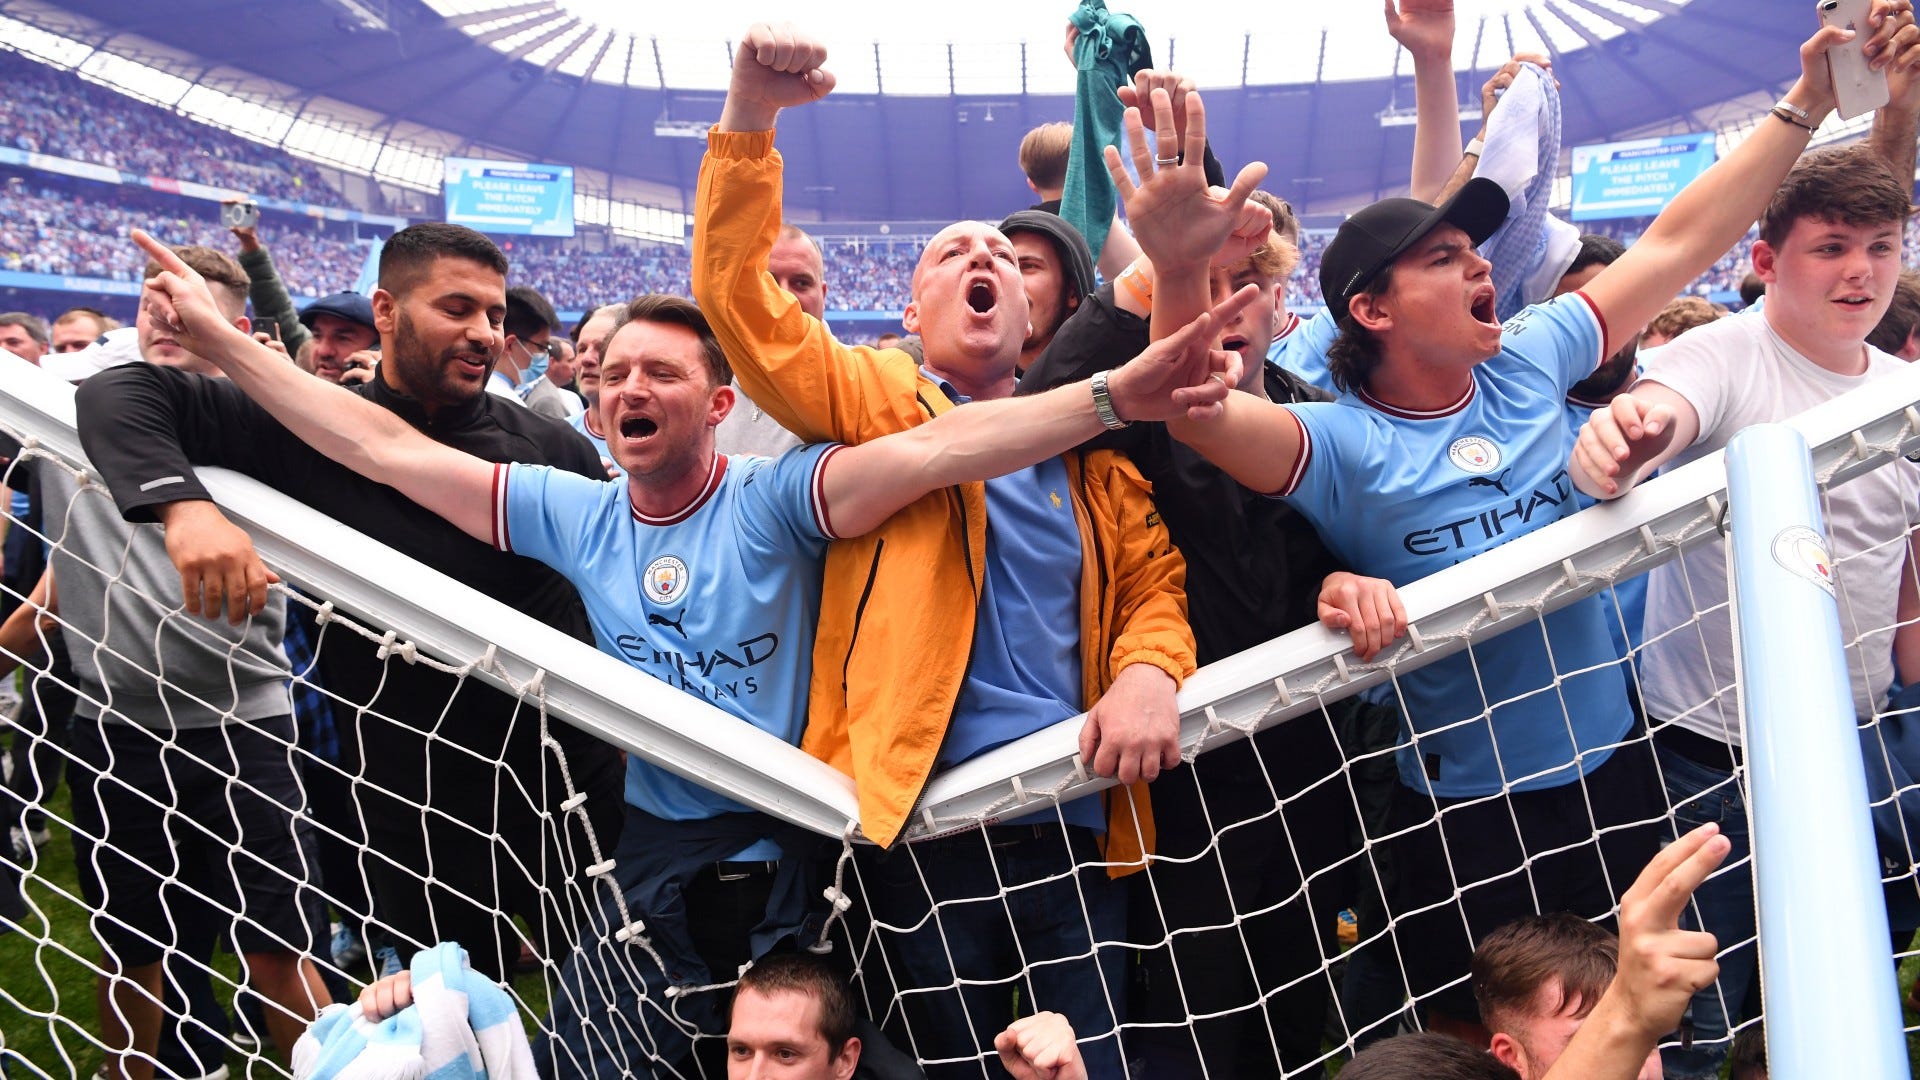 Manchester City fans goal posts pitch invasion